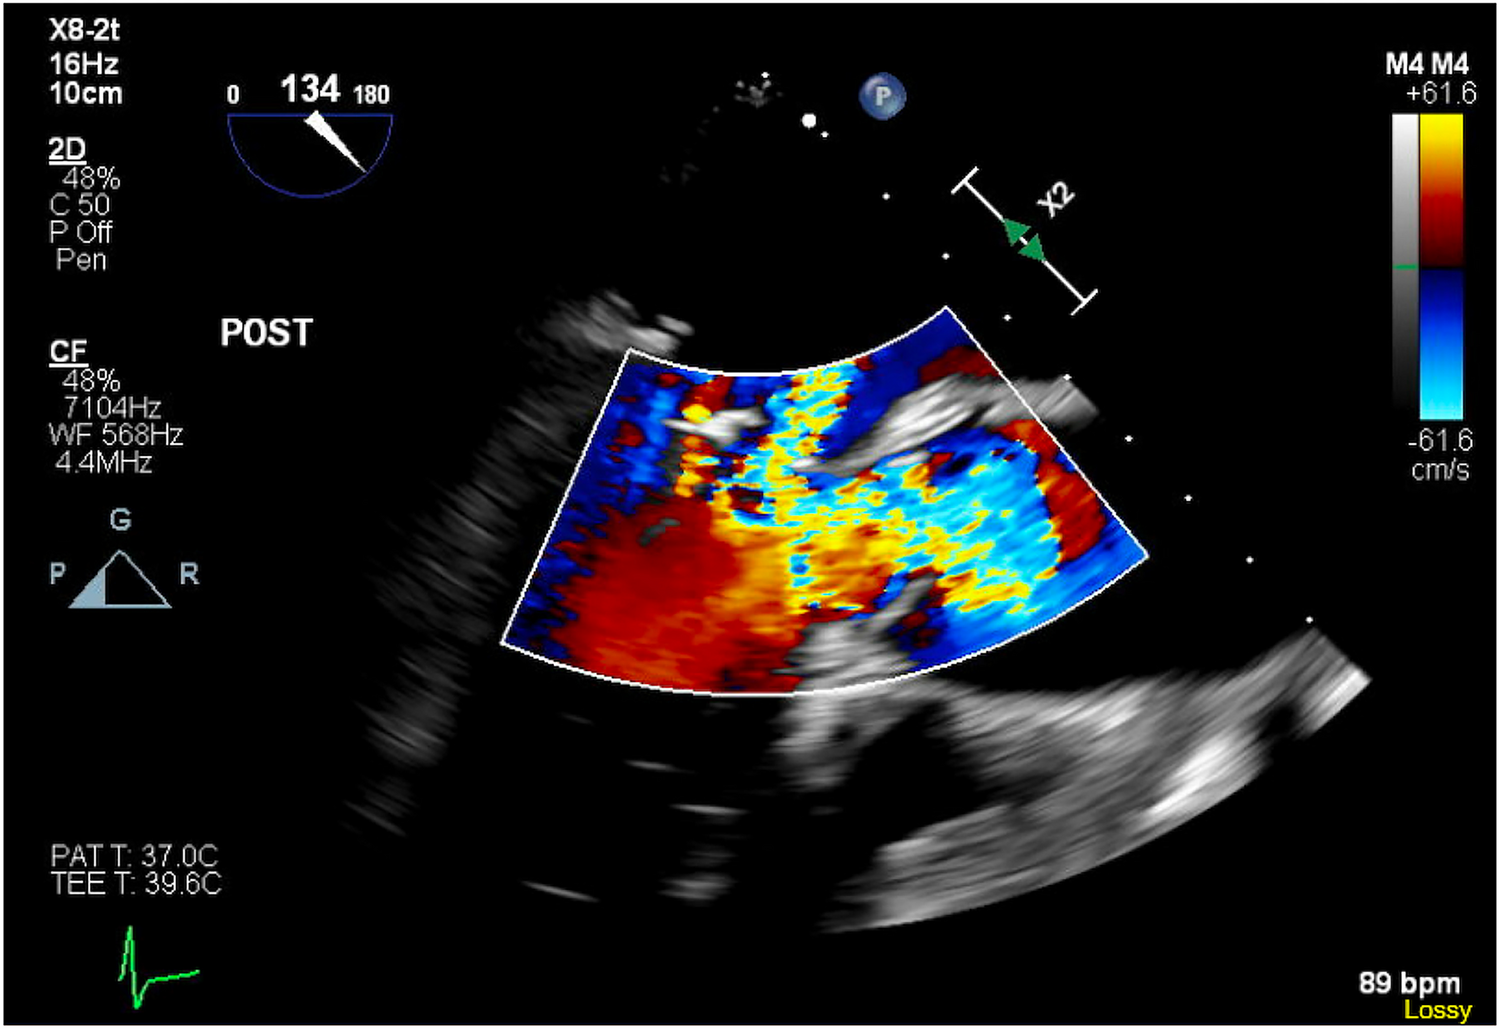 Intraoperative Echocardiography: Guide to Decision-Making